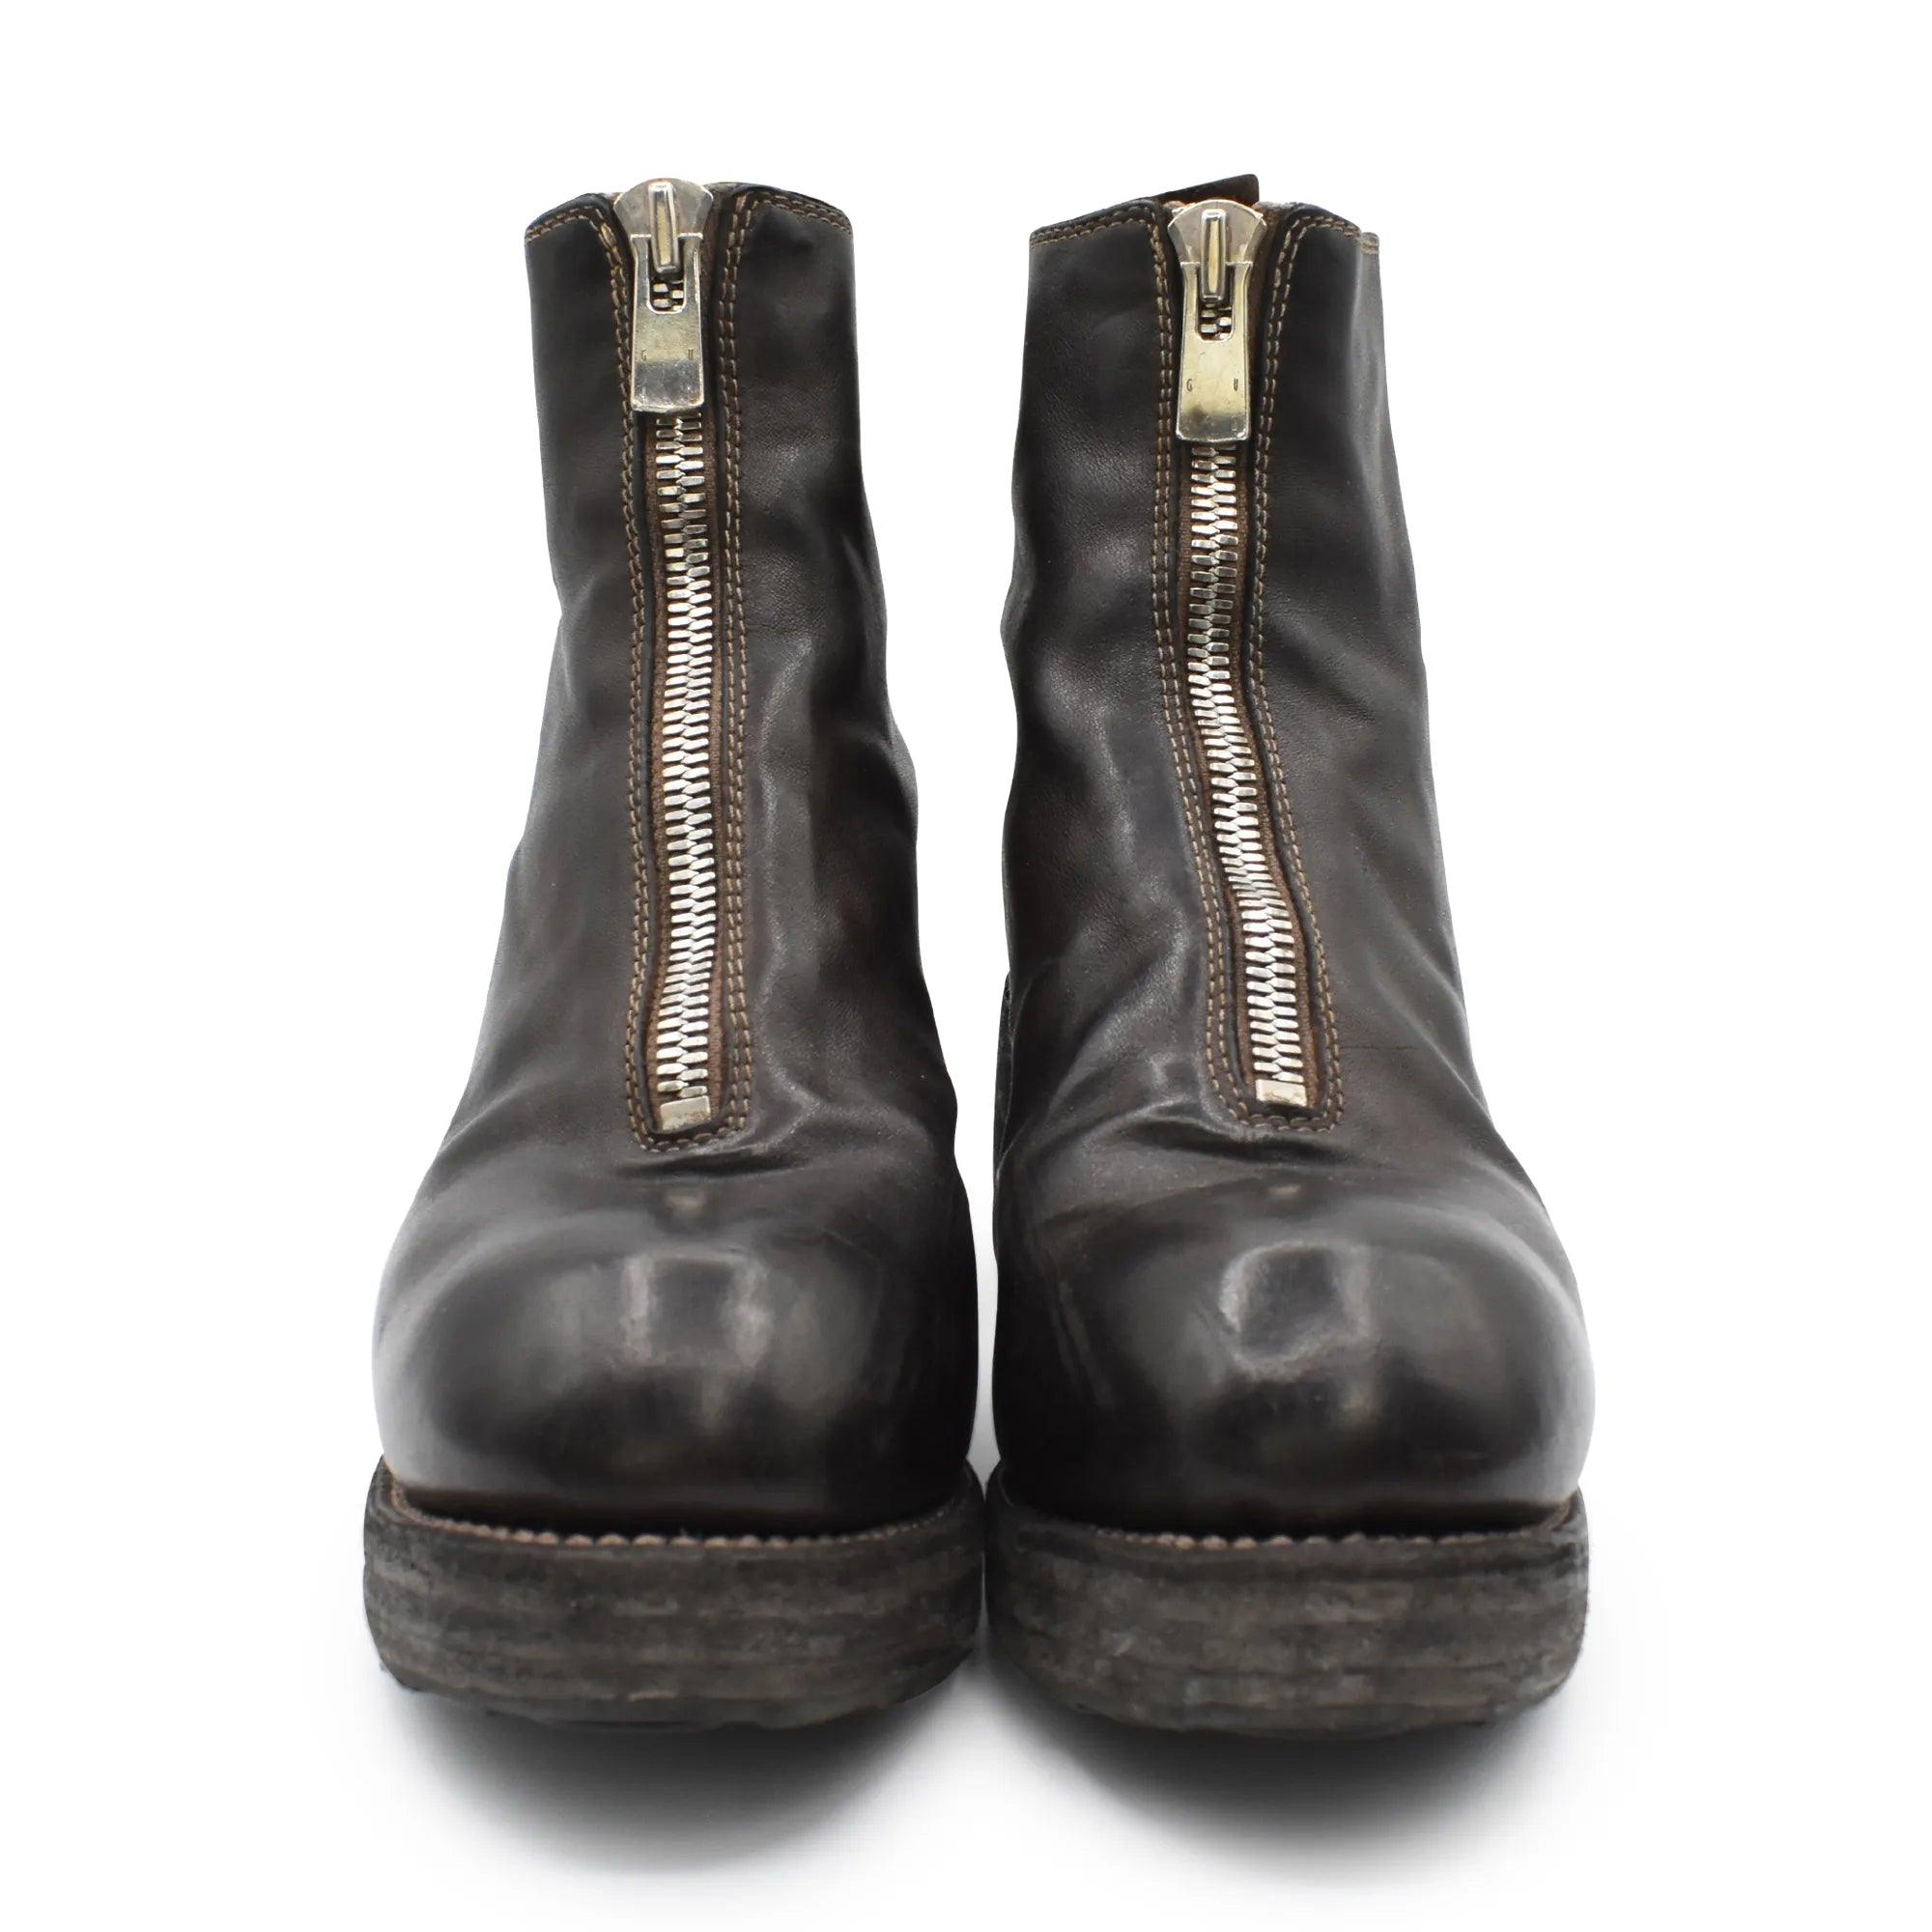 Guidi Boots - Women's 38 - Fashionably Yours